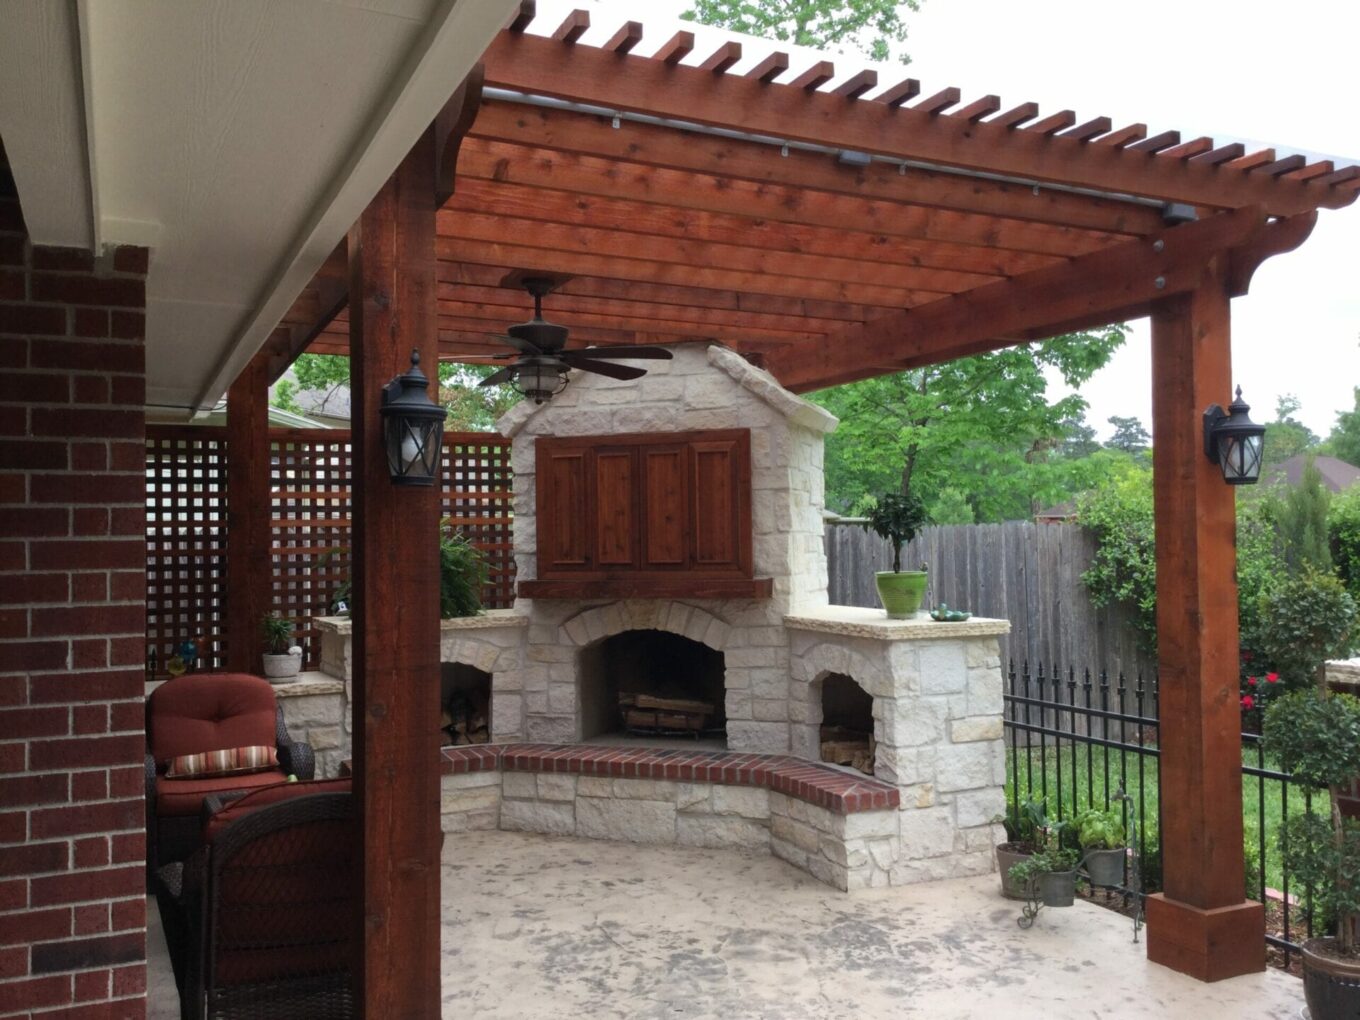 A patio with an outdoor fireplace and pergola.